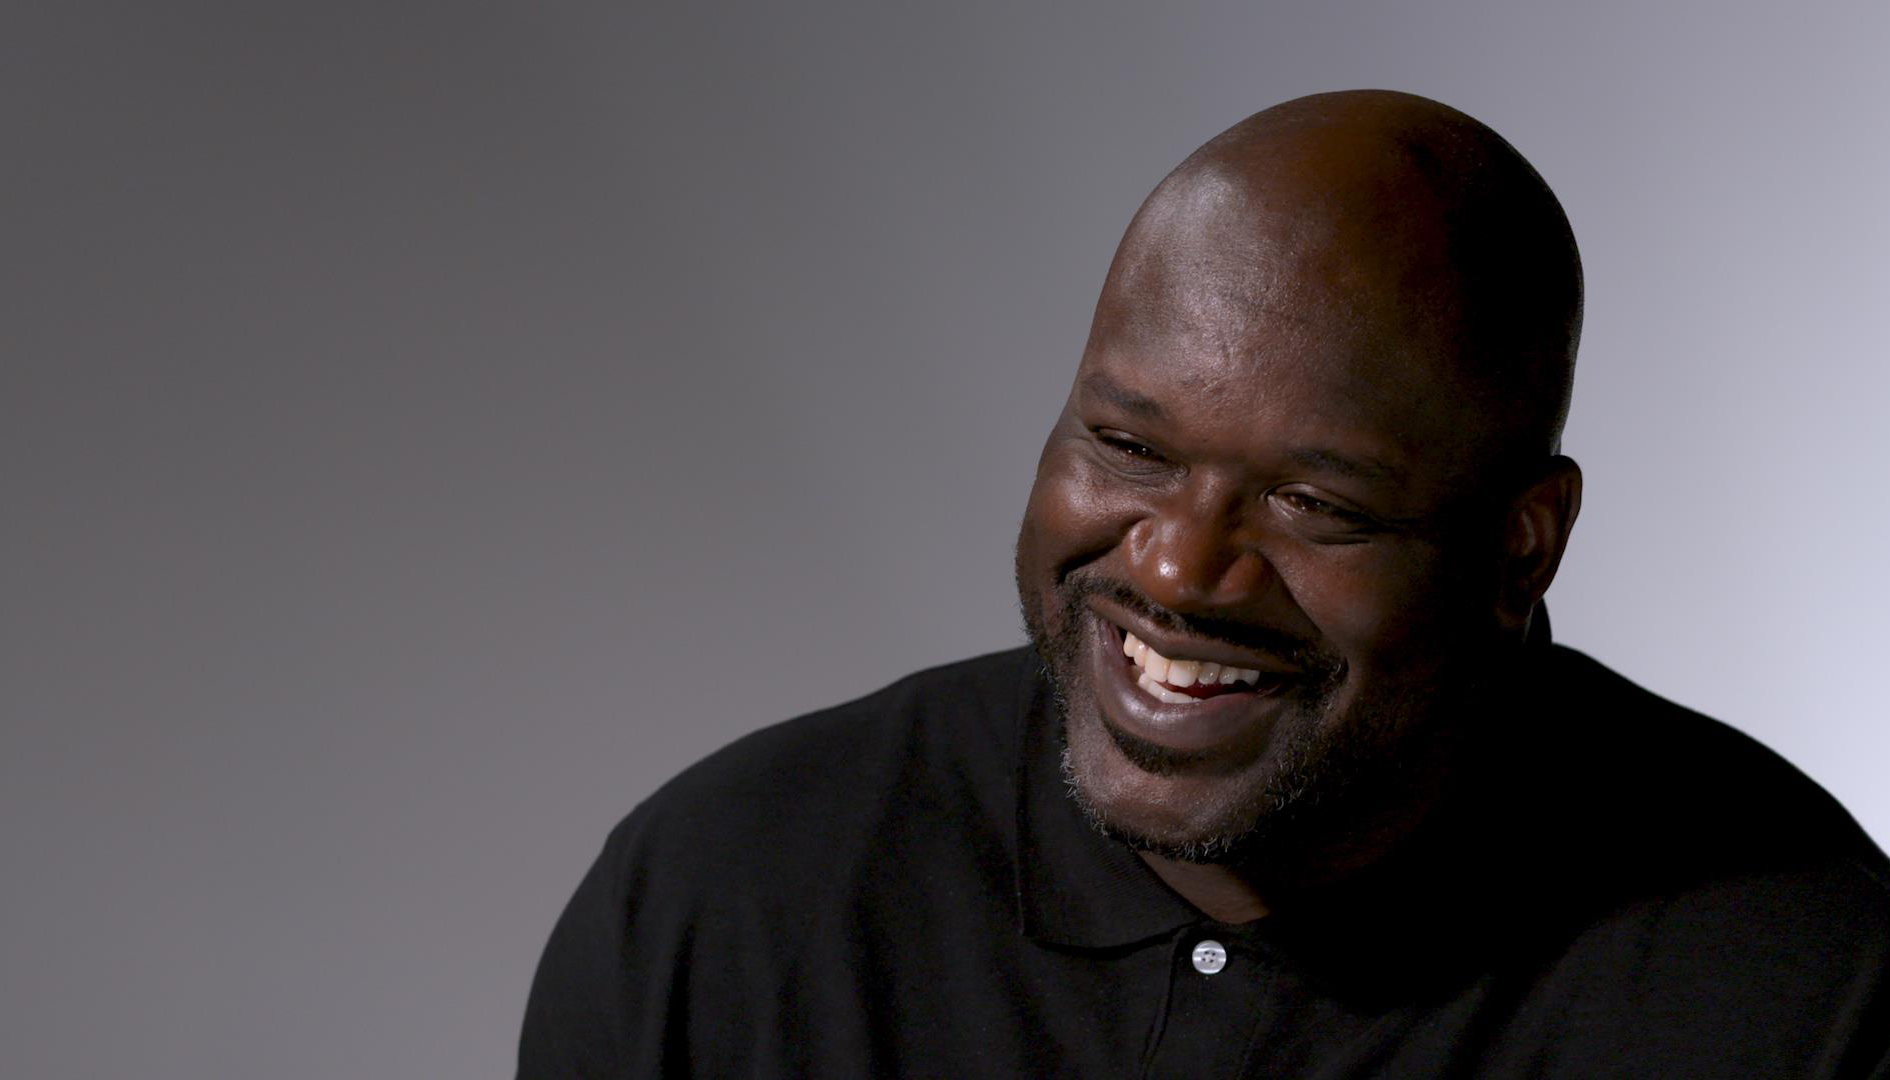 Watch: Shaquille O’Neal pays off fan's engagement ring